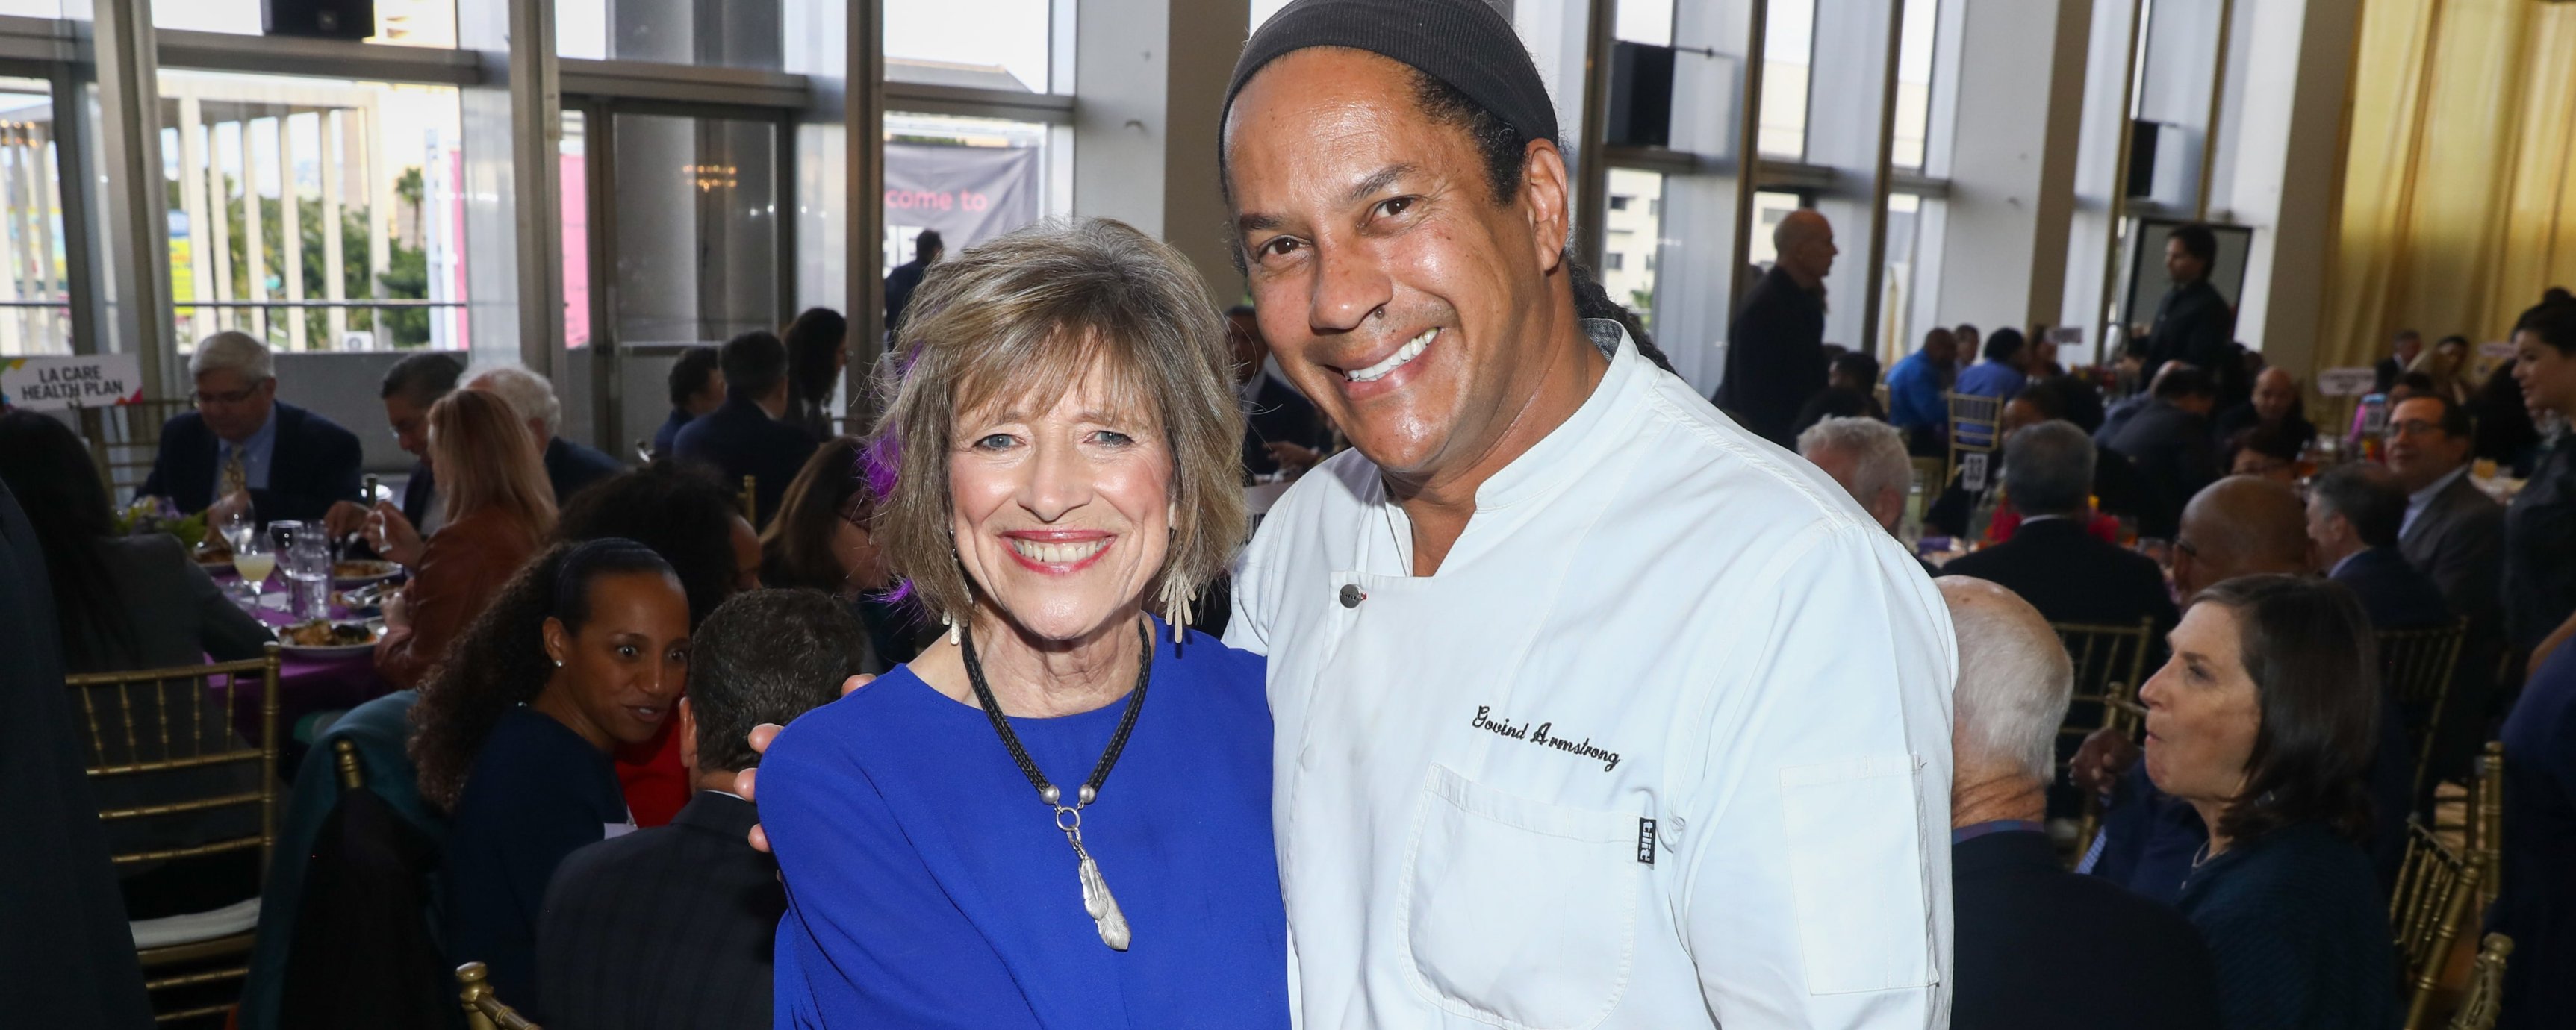 Dyan Sublett, an older white woman, standing with Chef Govind Armstrong, a middle-aged Afro-Caribbean man at the event